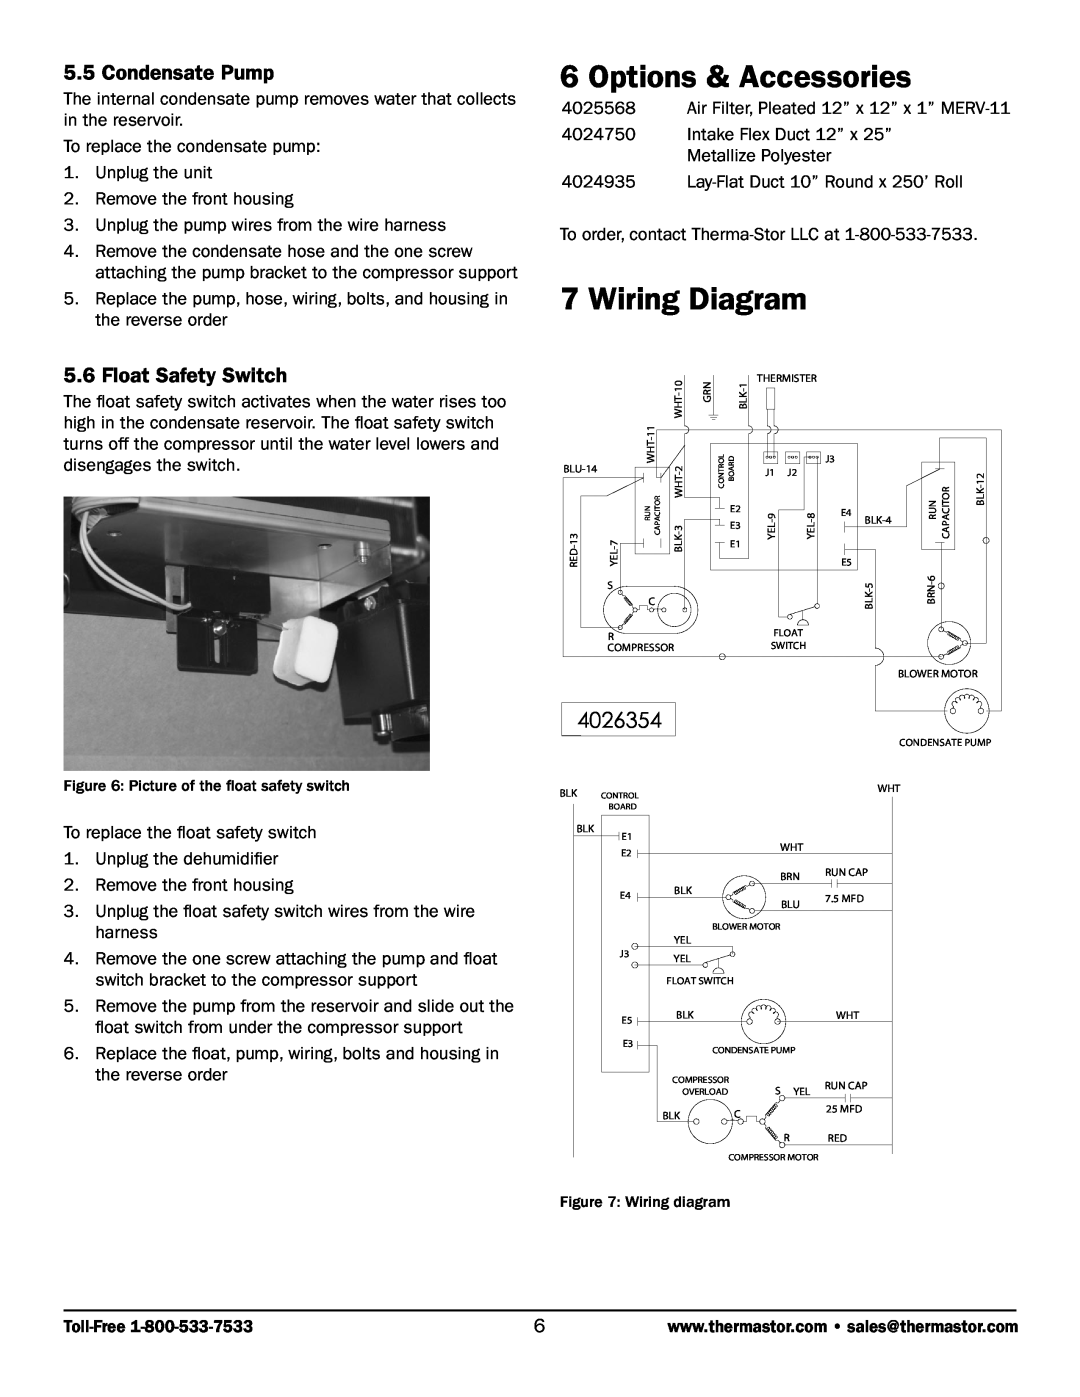 Therma-Stor Products Group R175 Options & Accessories, Wiring Diagram, 4026354, Condensate Pump, Float Safety Switch 